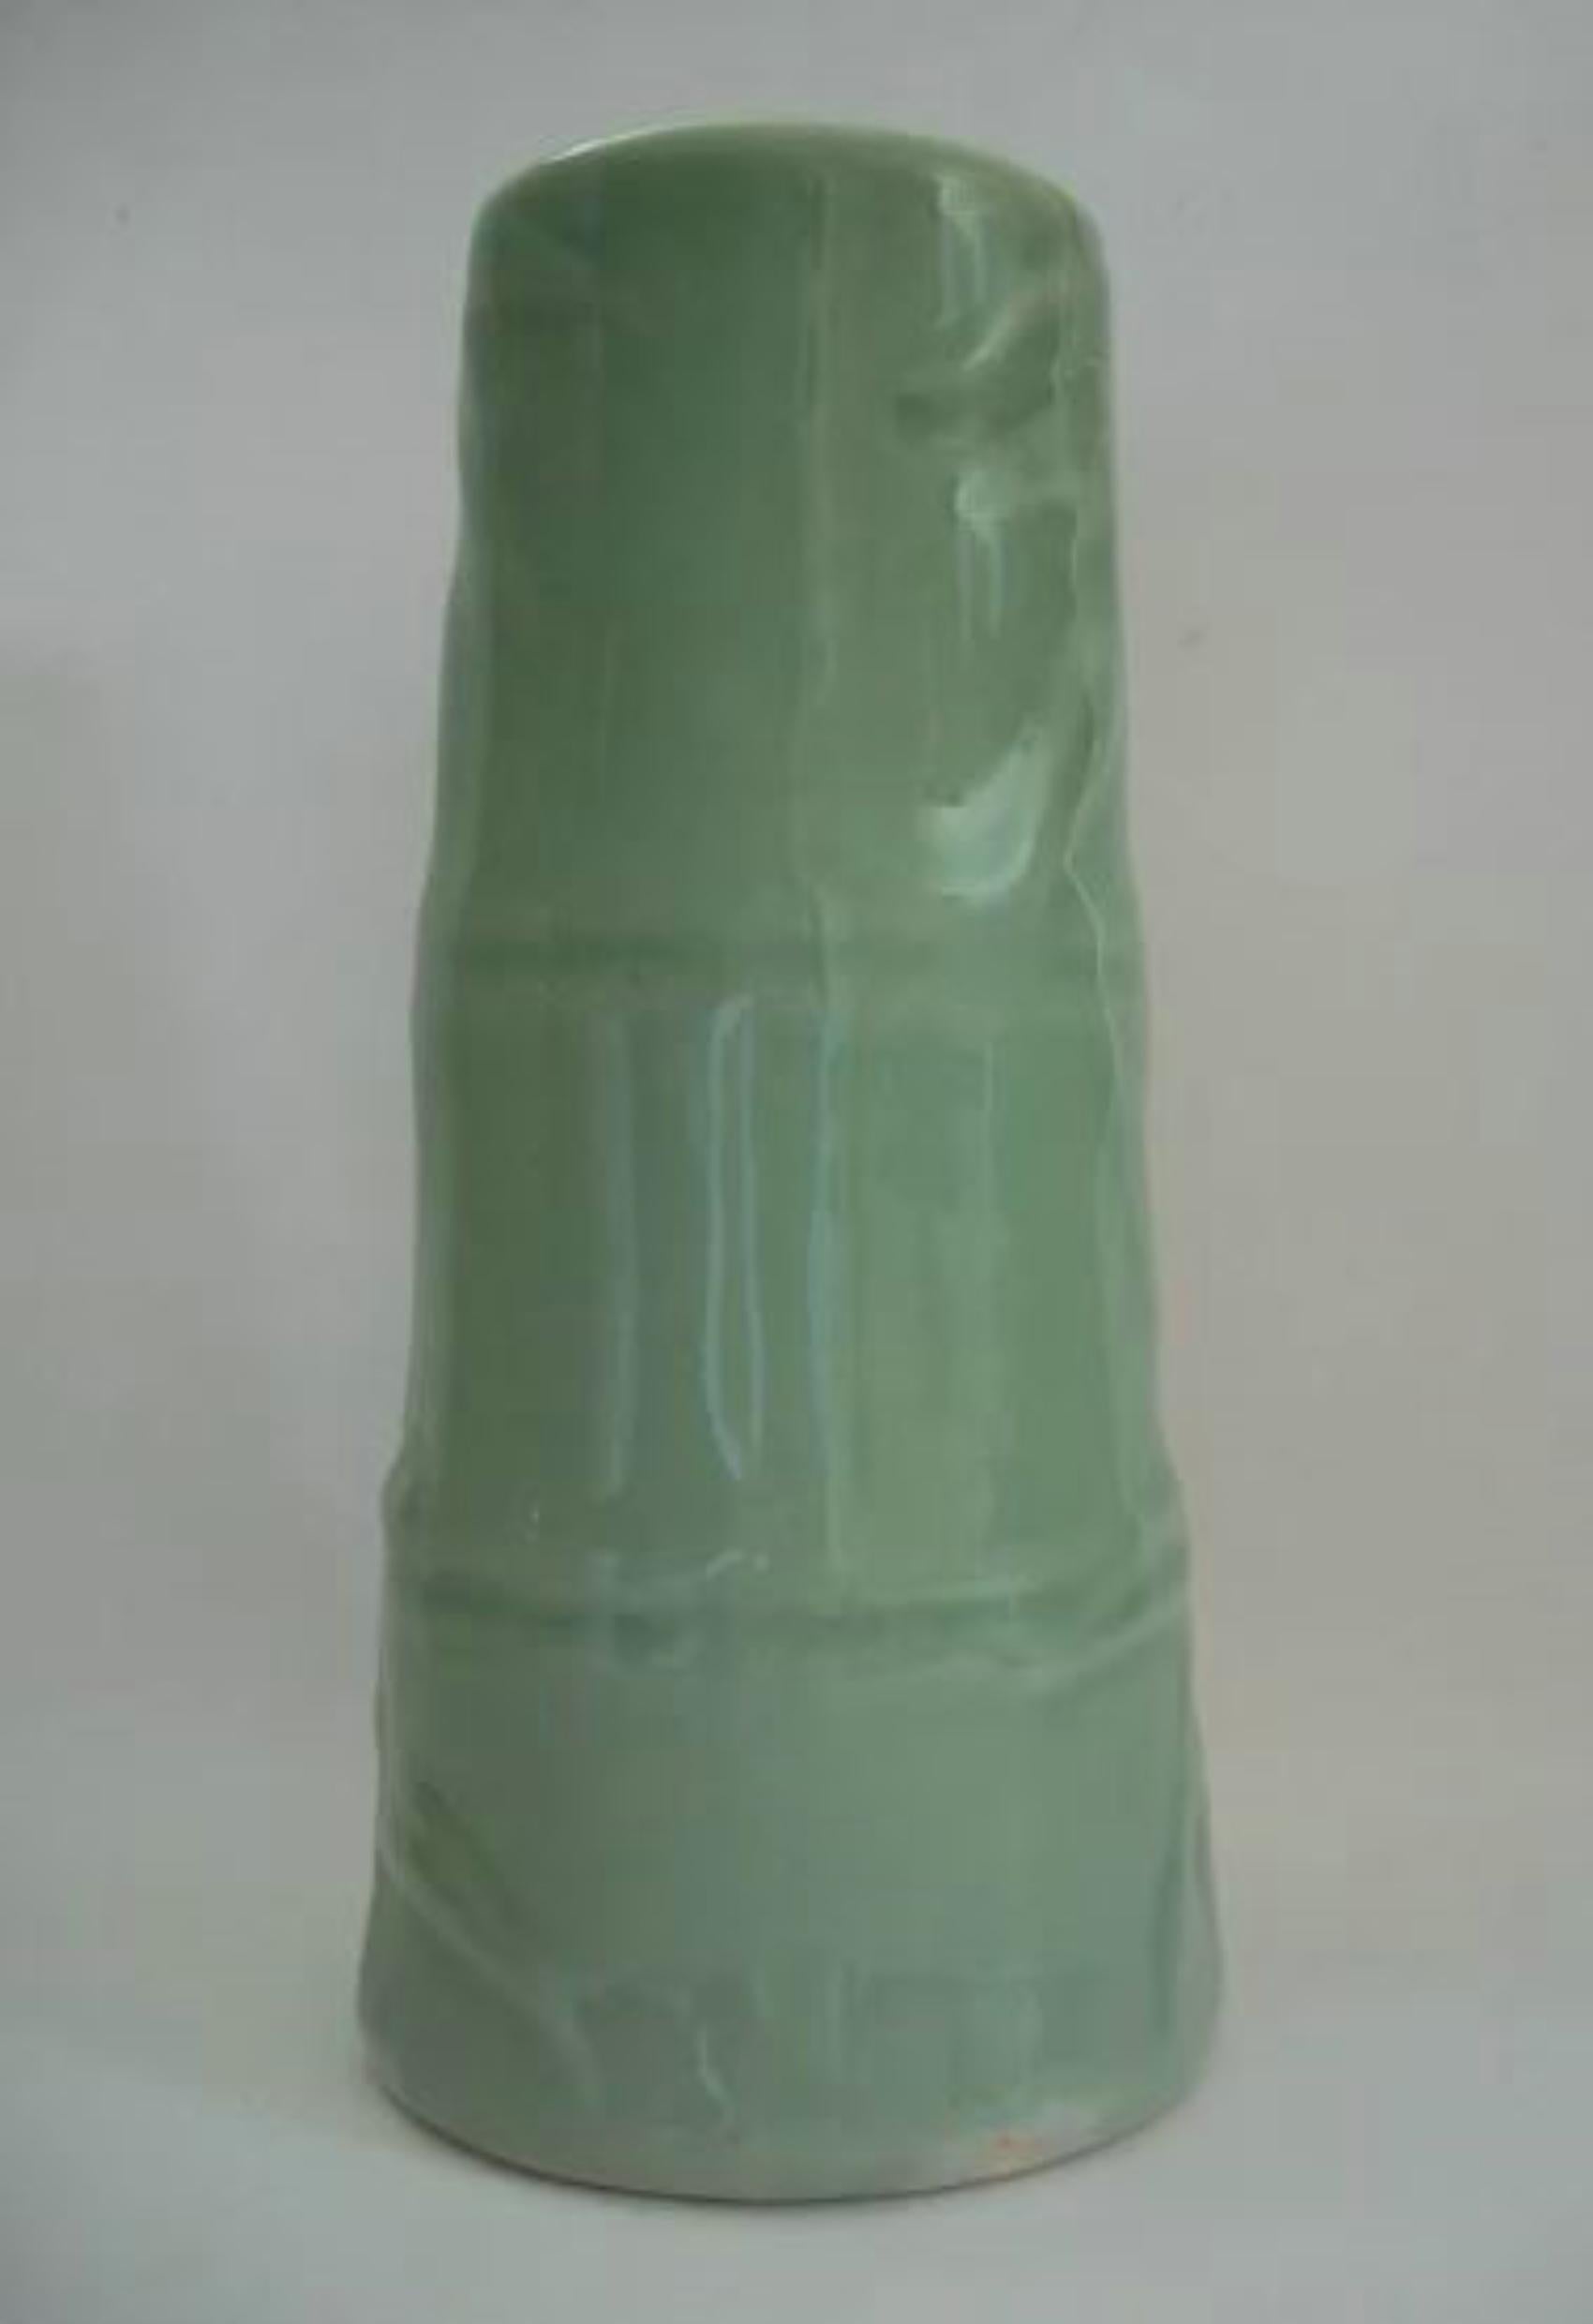 Vintage Asian Celadon Glazed Vase, Bamboo Form, Unsigned, Mid 20th Century For Sale 1